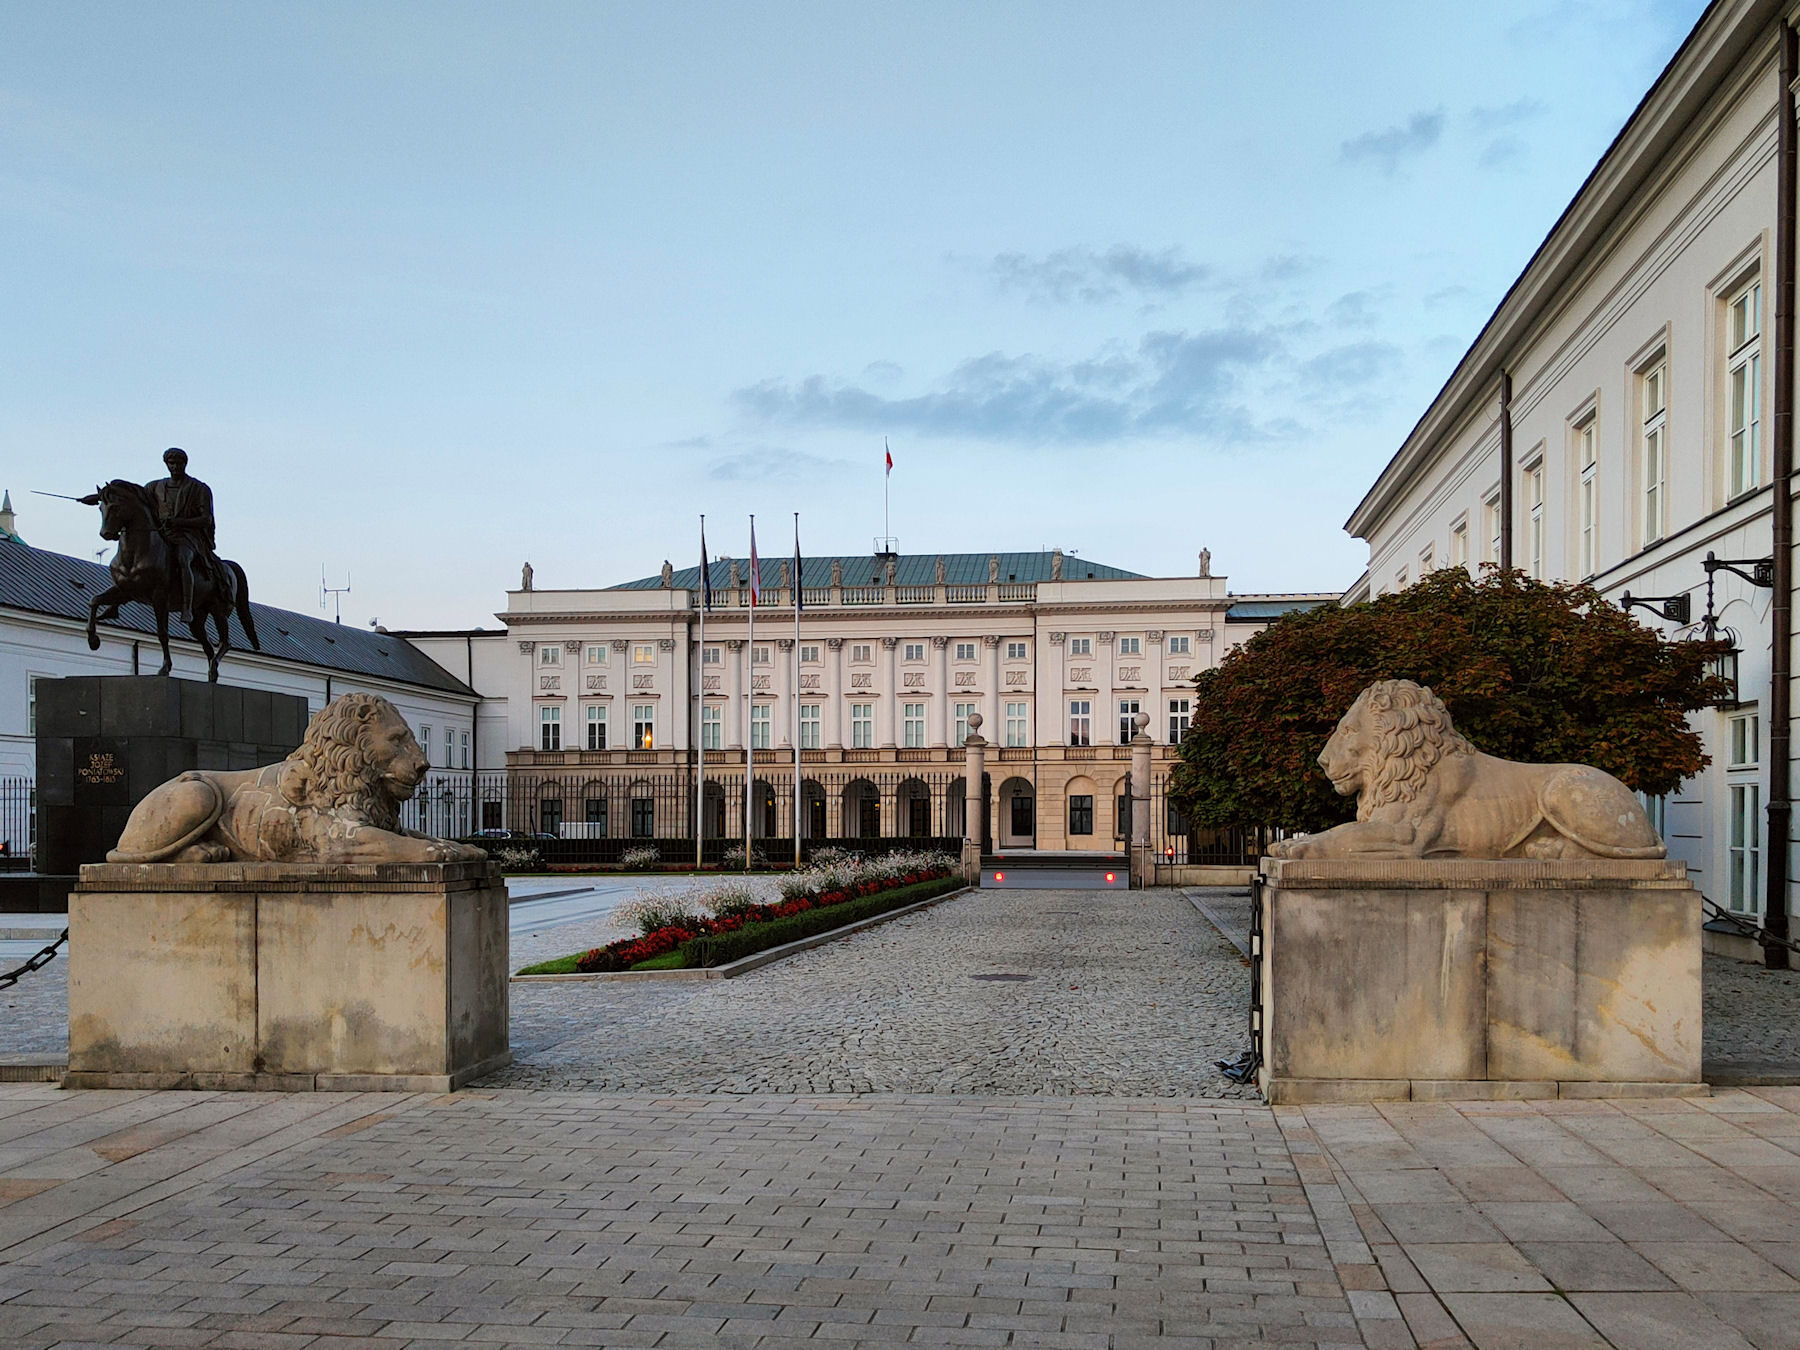 The Presidential Palace in Warsaw (Photo: Szczecinolog)